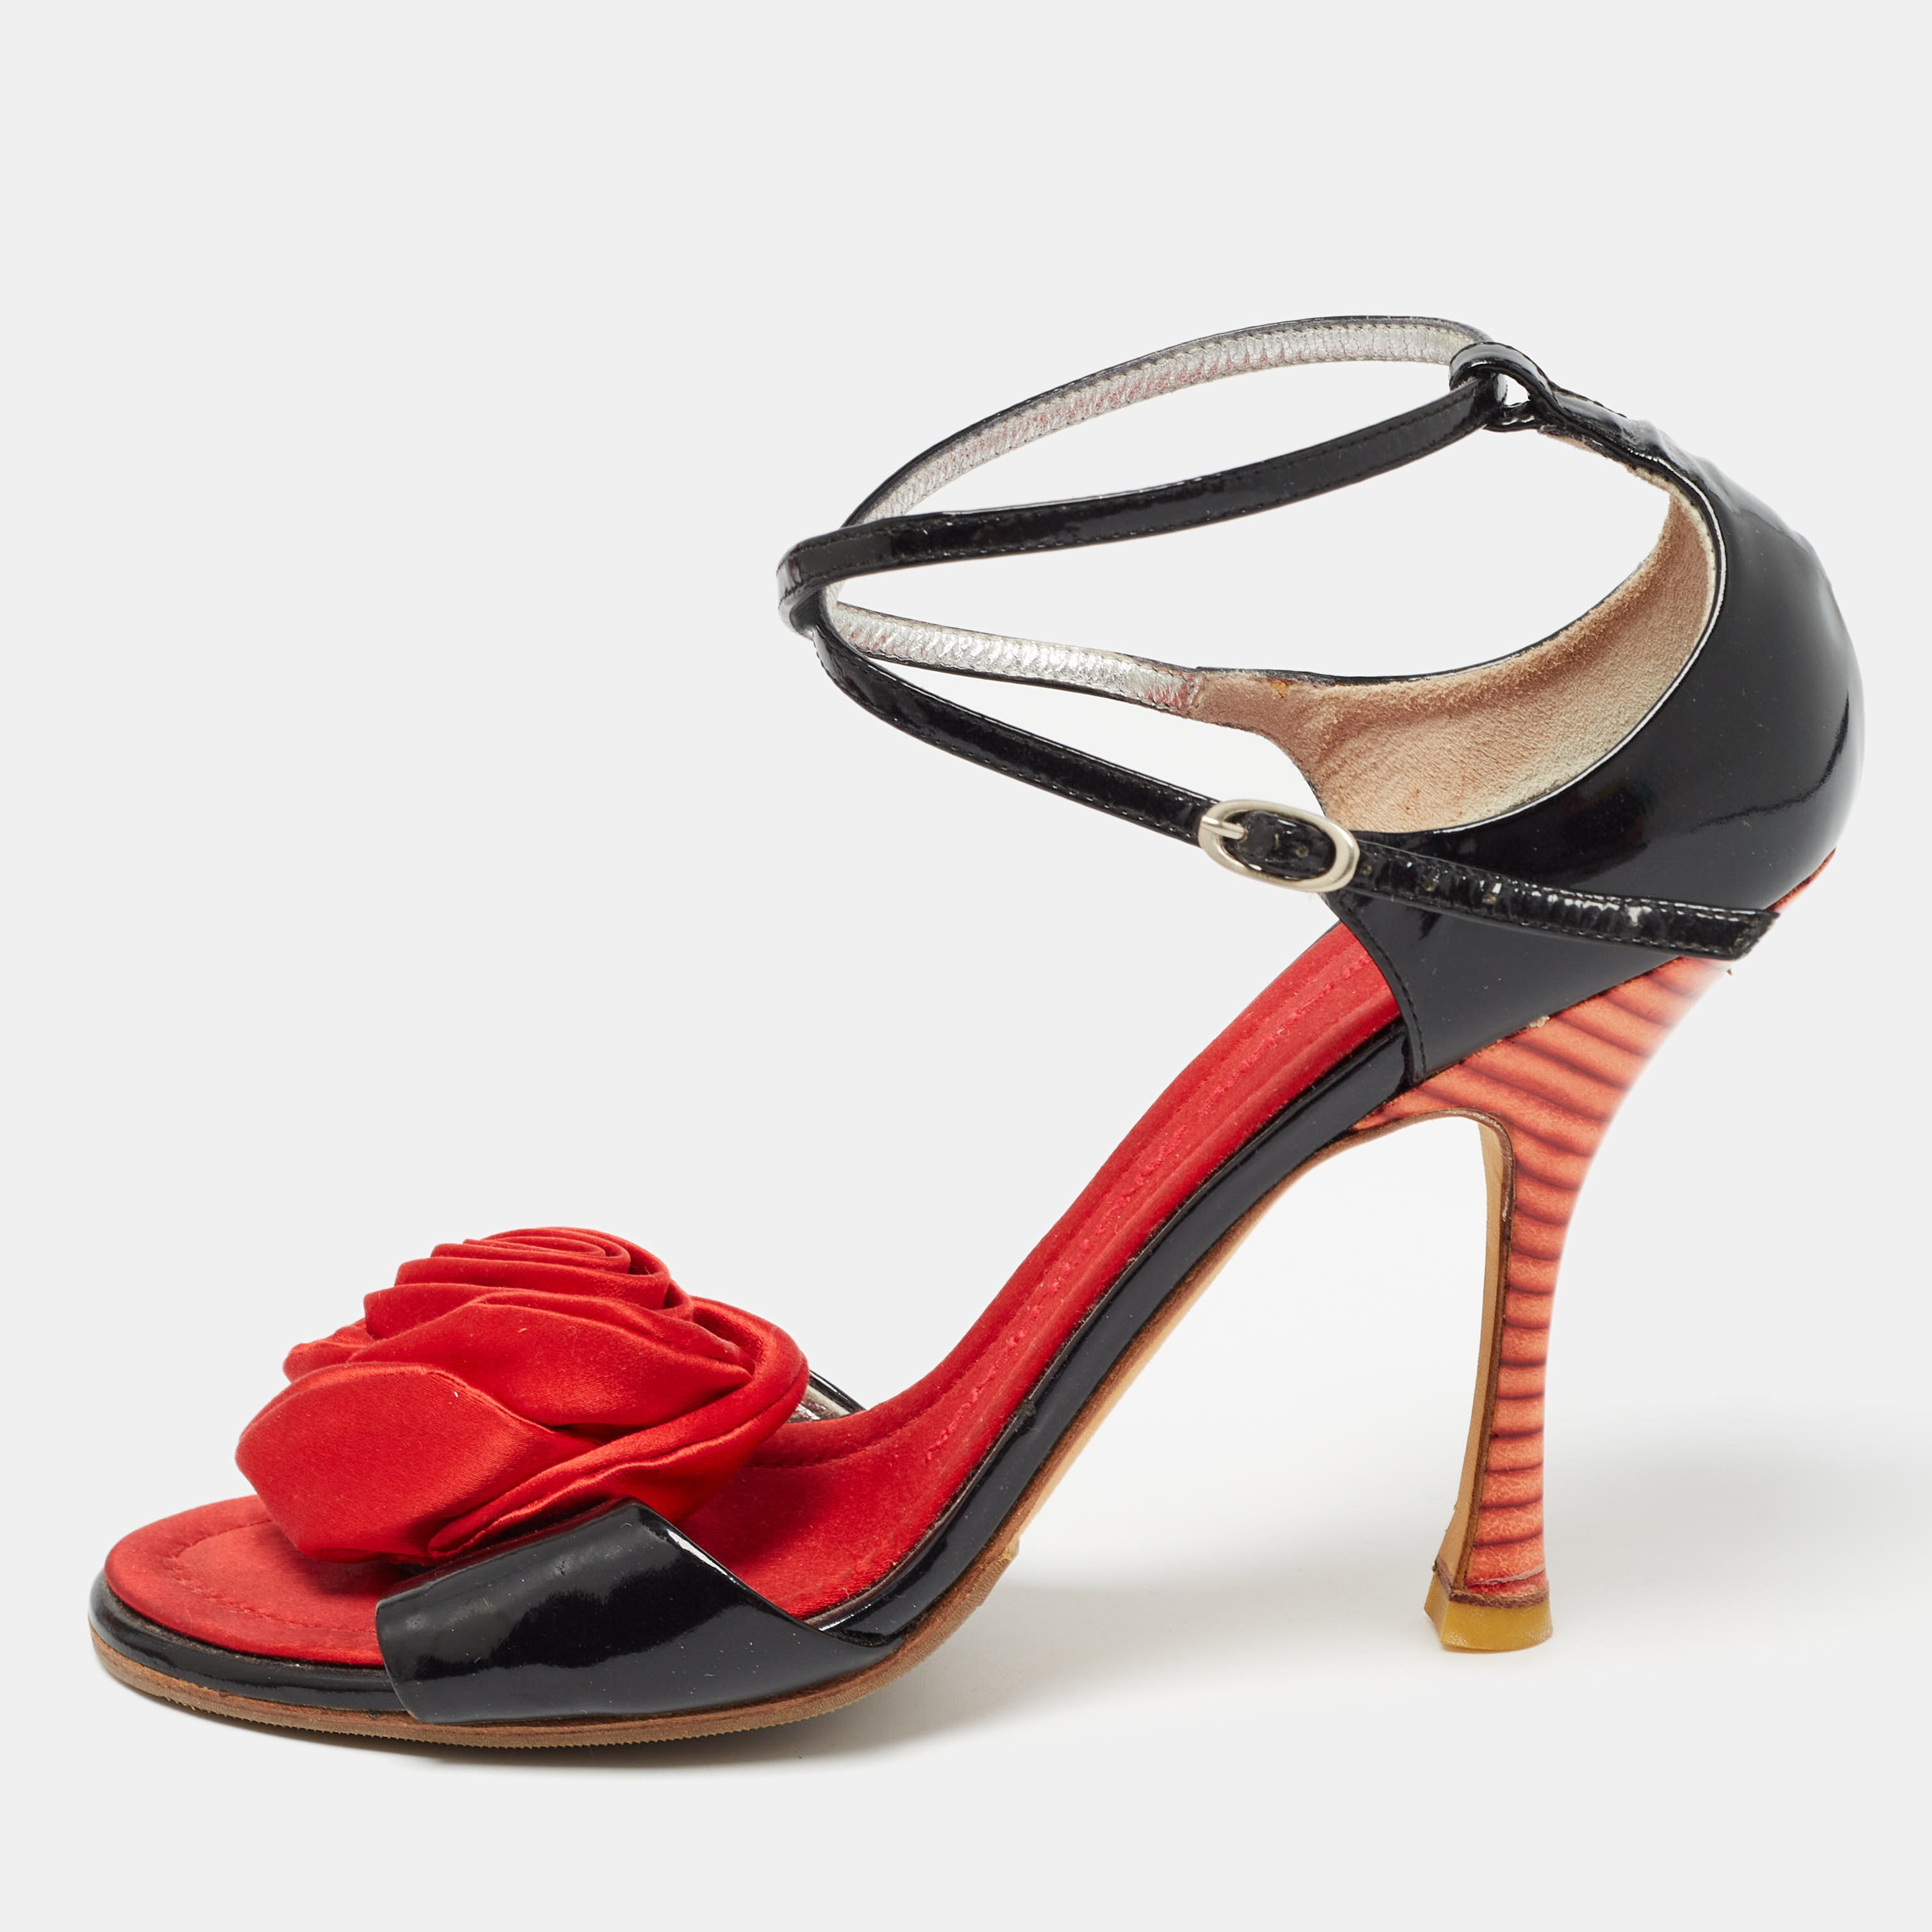 

Giuseppe Zanotti Black/Red Patent Leather and Satin Rose Applique Sandals Size